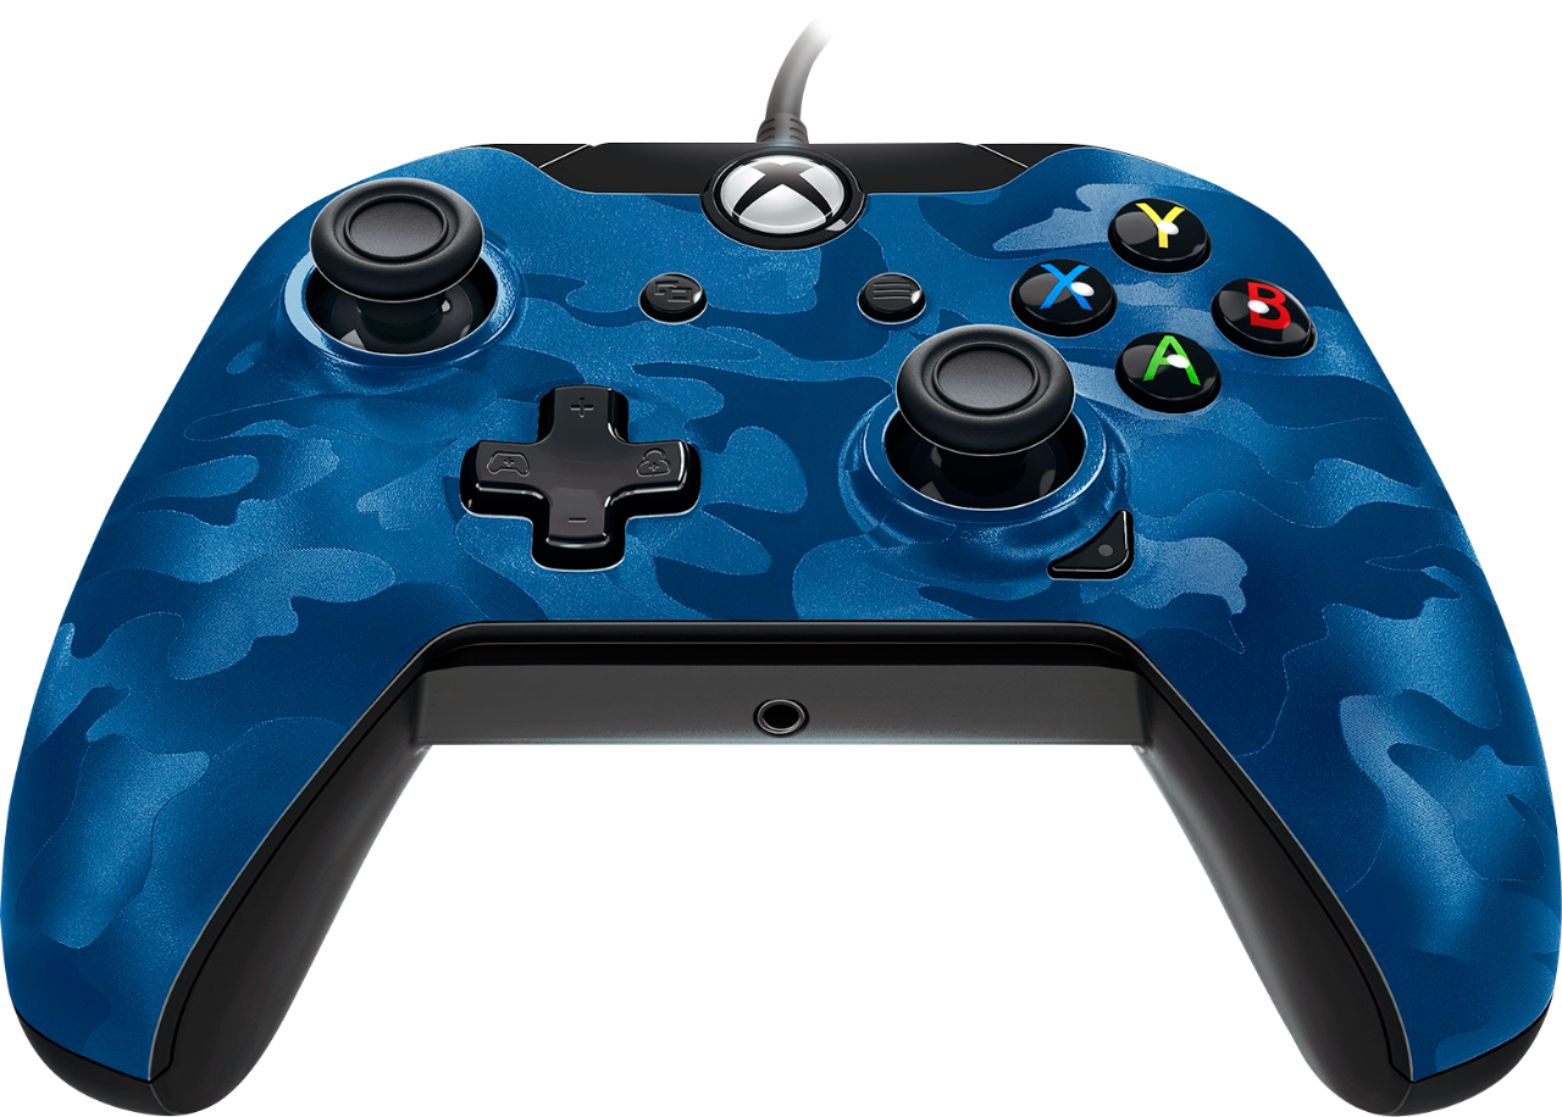 PDP Manette Gaming filaire - Camo Blue - pour Xbox Series X|S, Xbox One et  PC